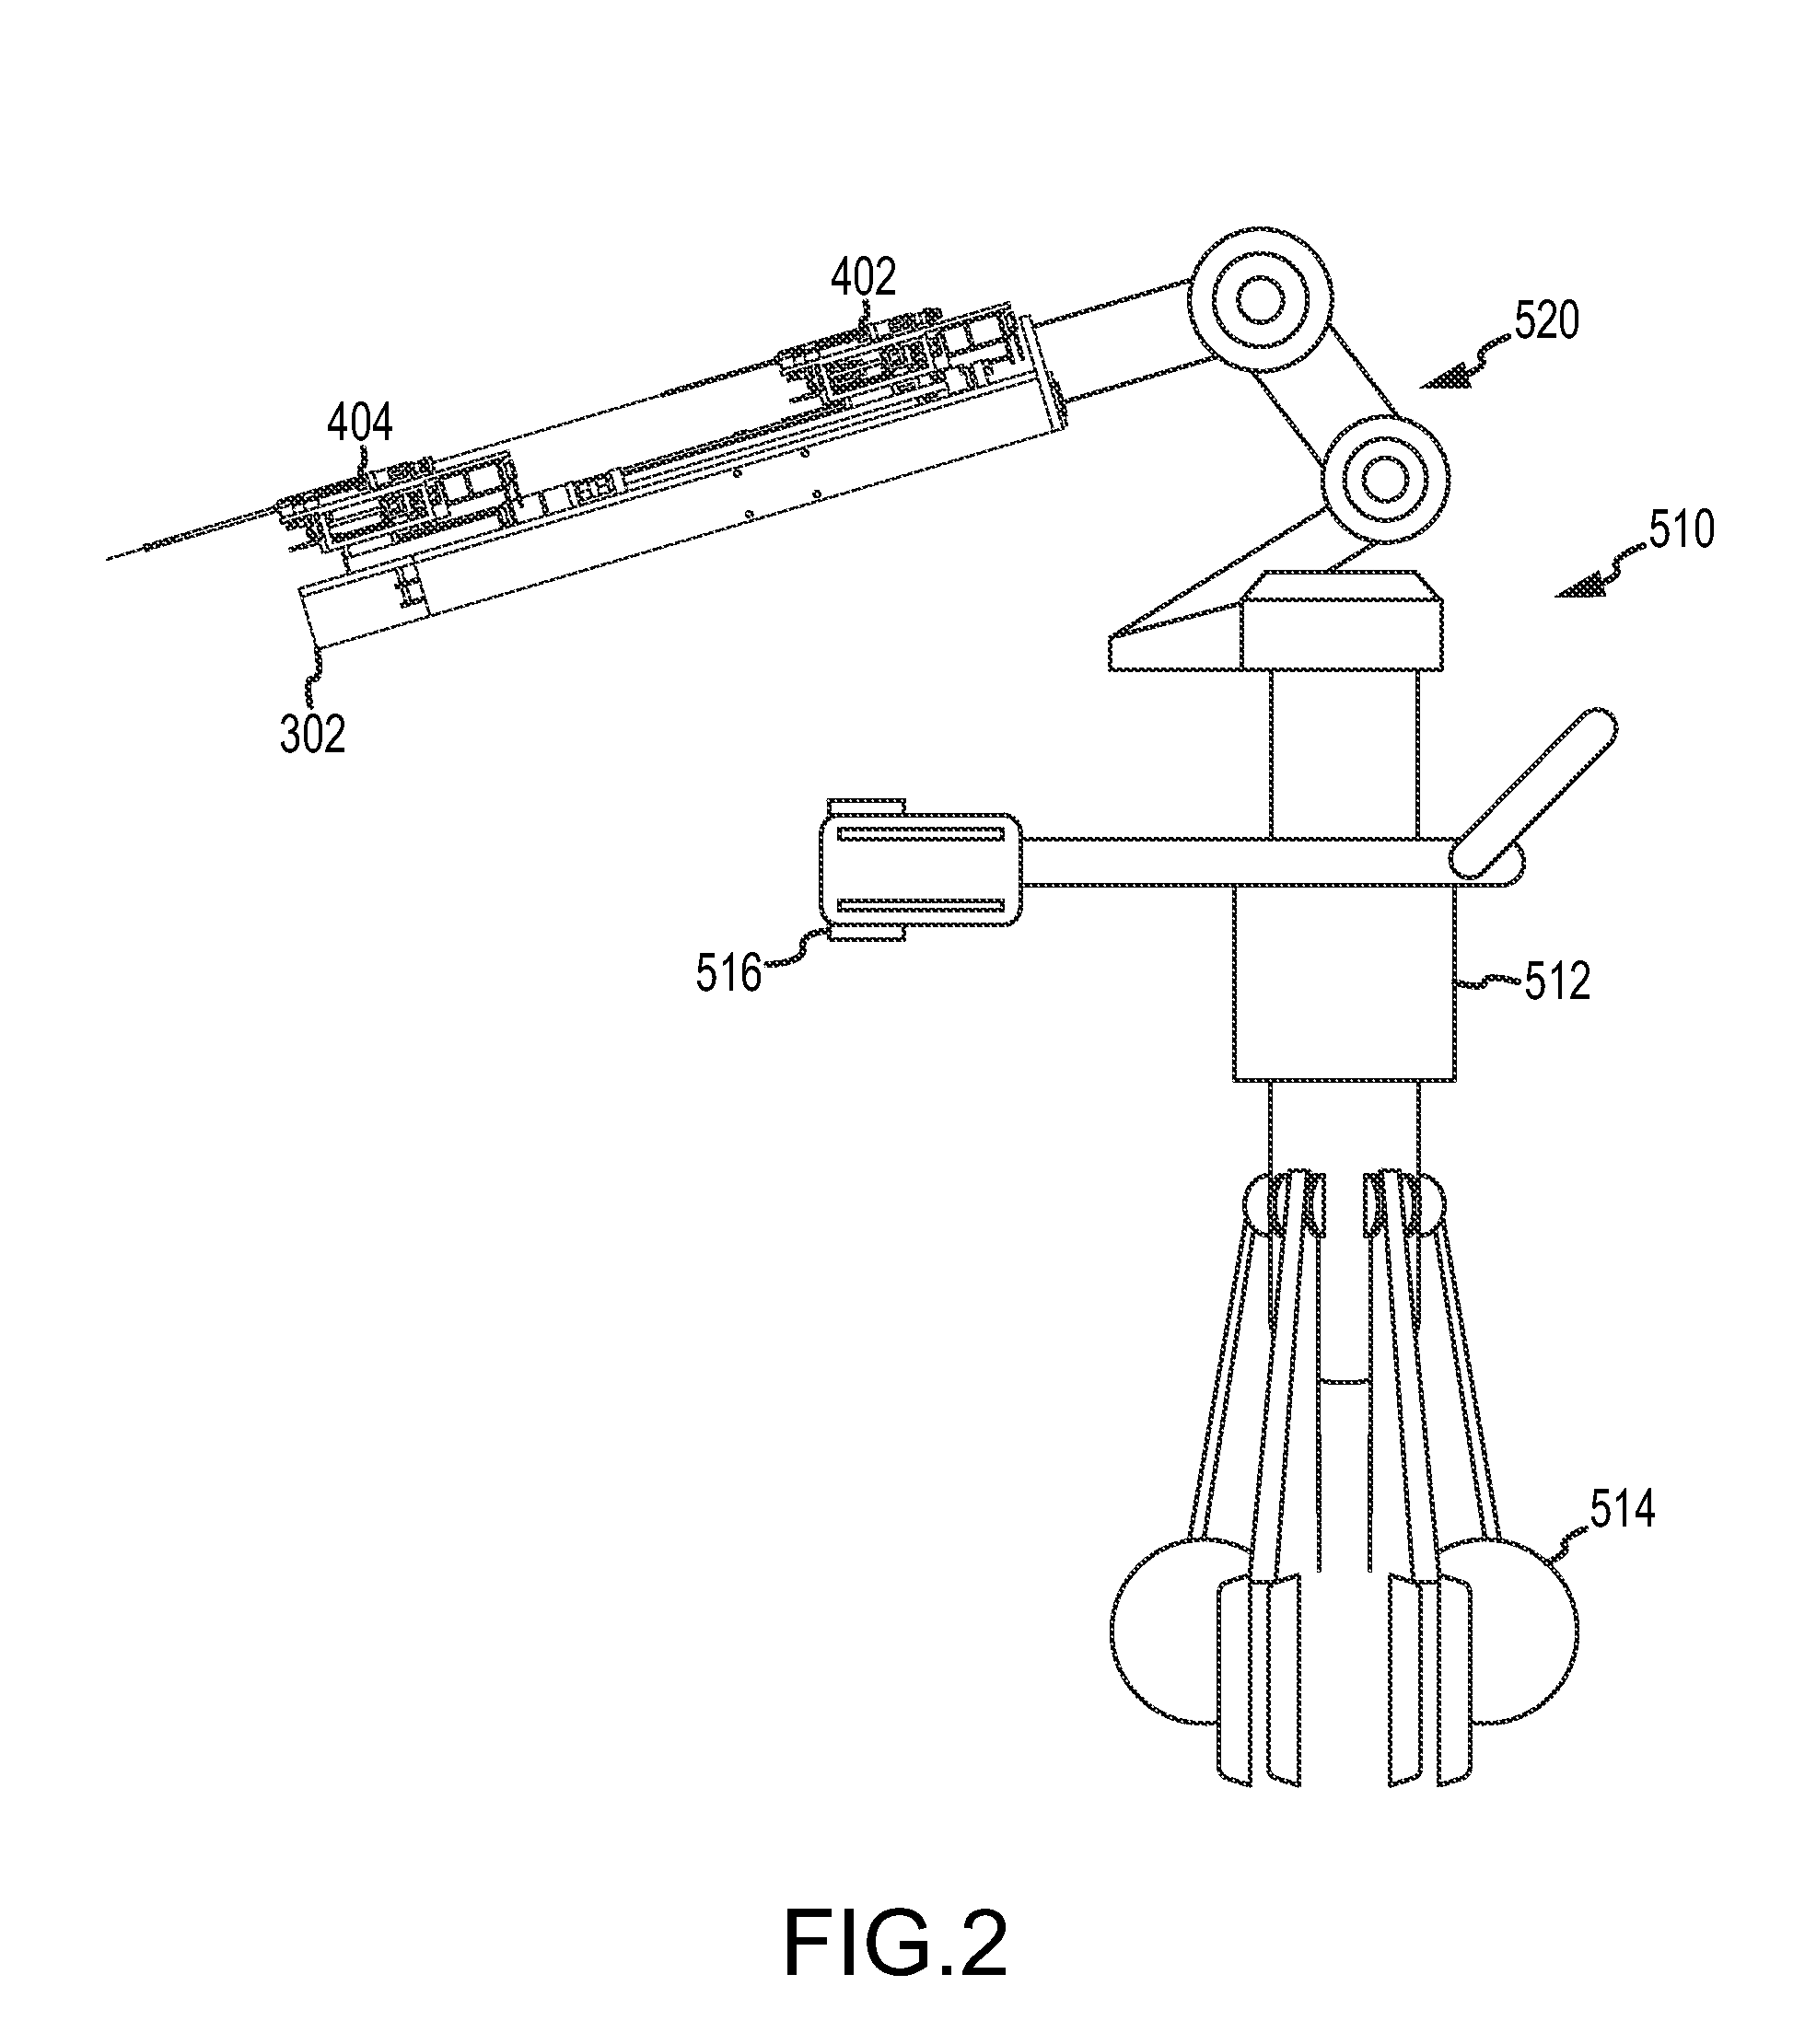 System and method for detection and avoidance of collisions of robotically-controlled medical devices